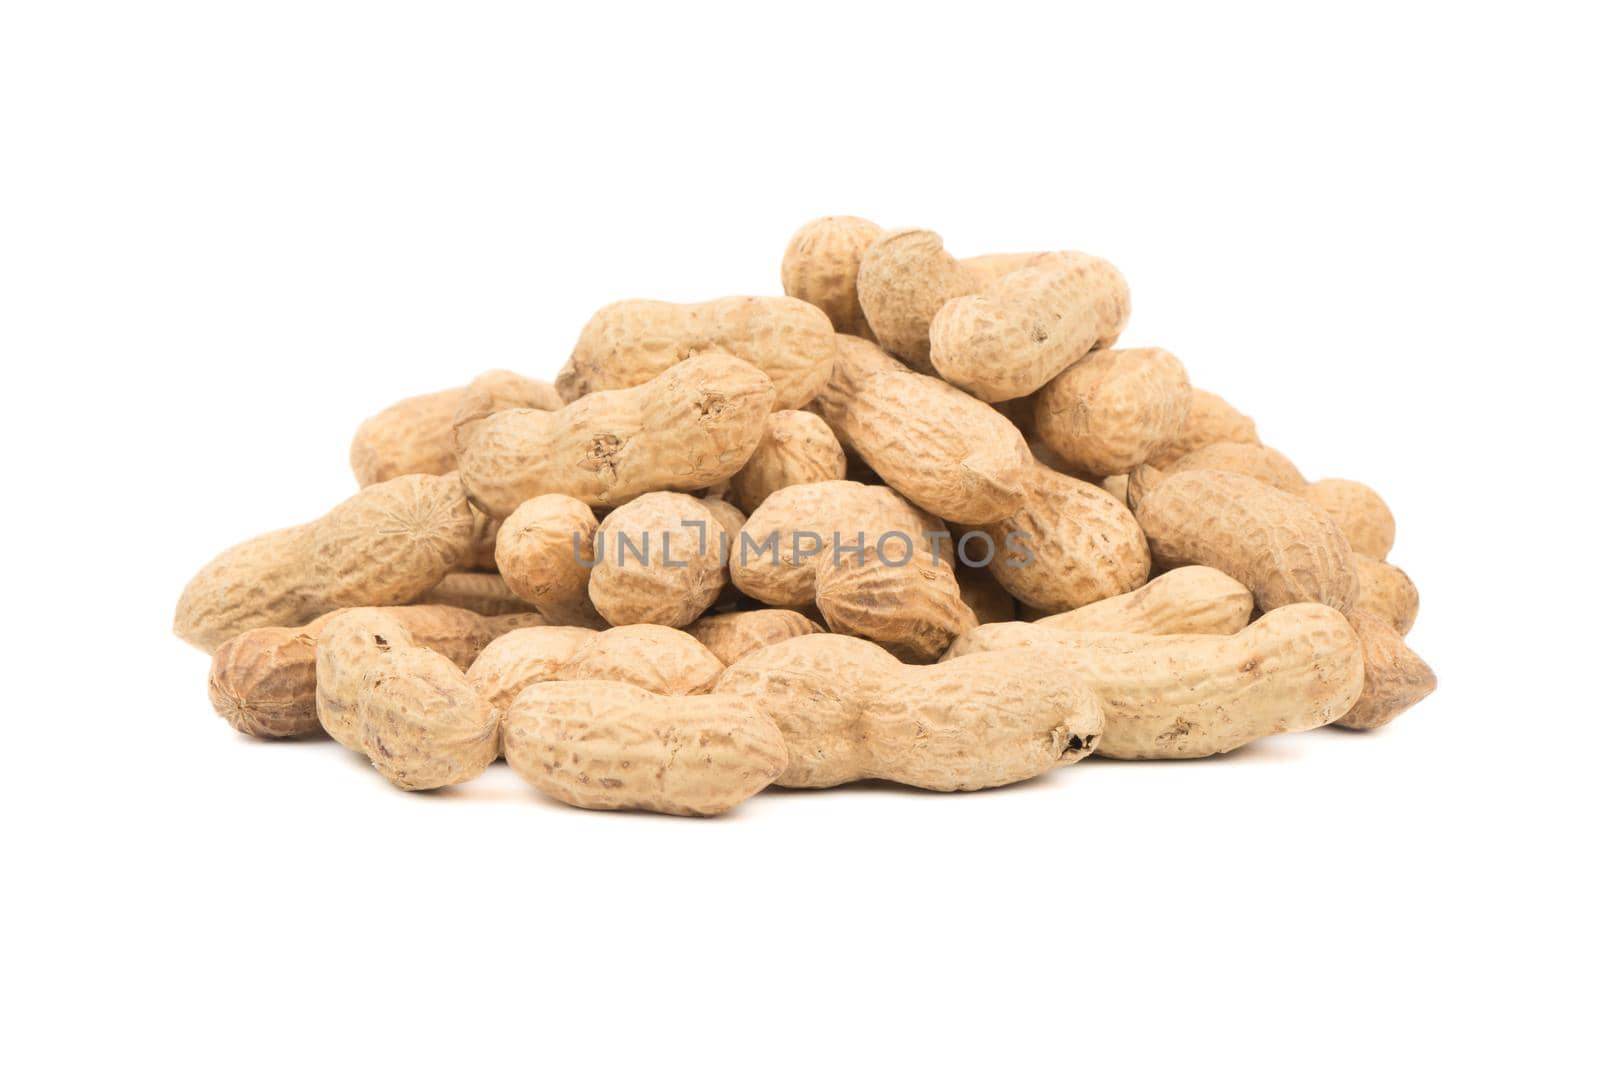 Bunch of peanuts in shell on white background